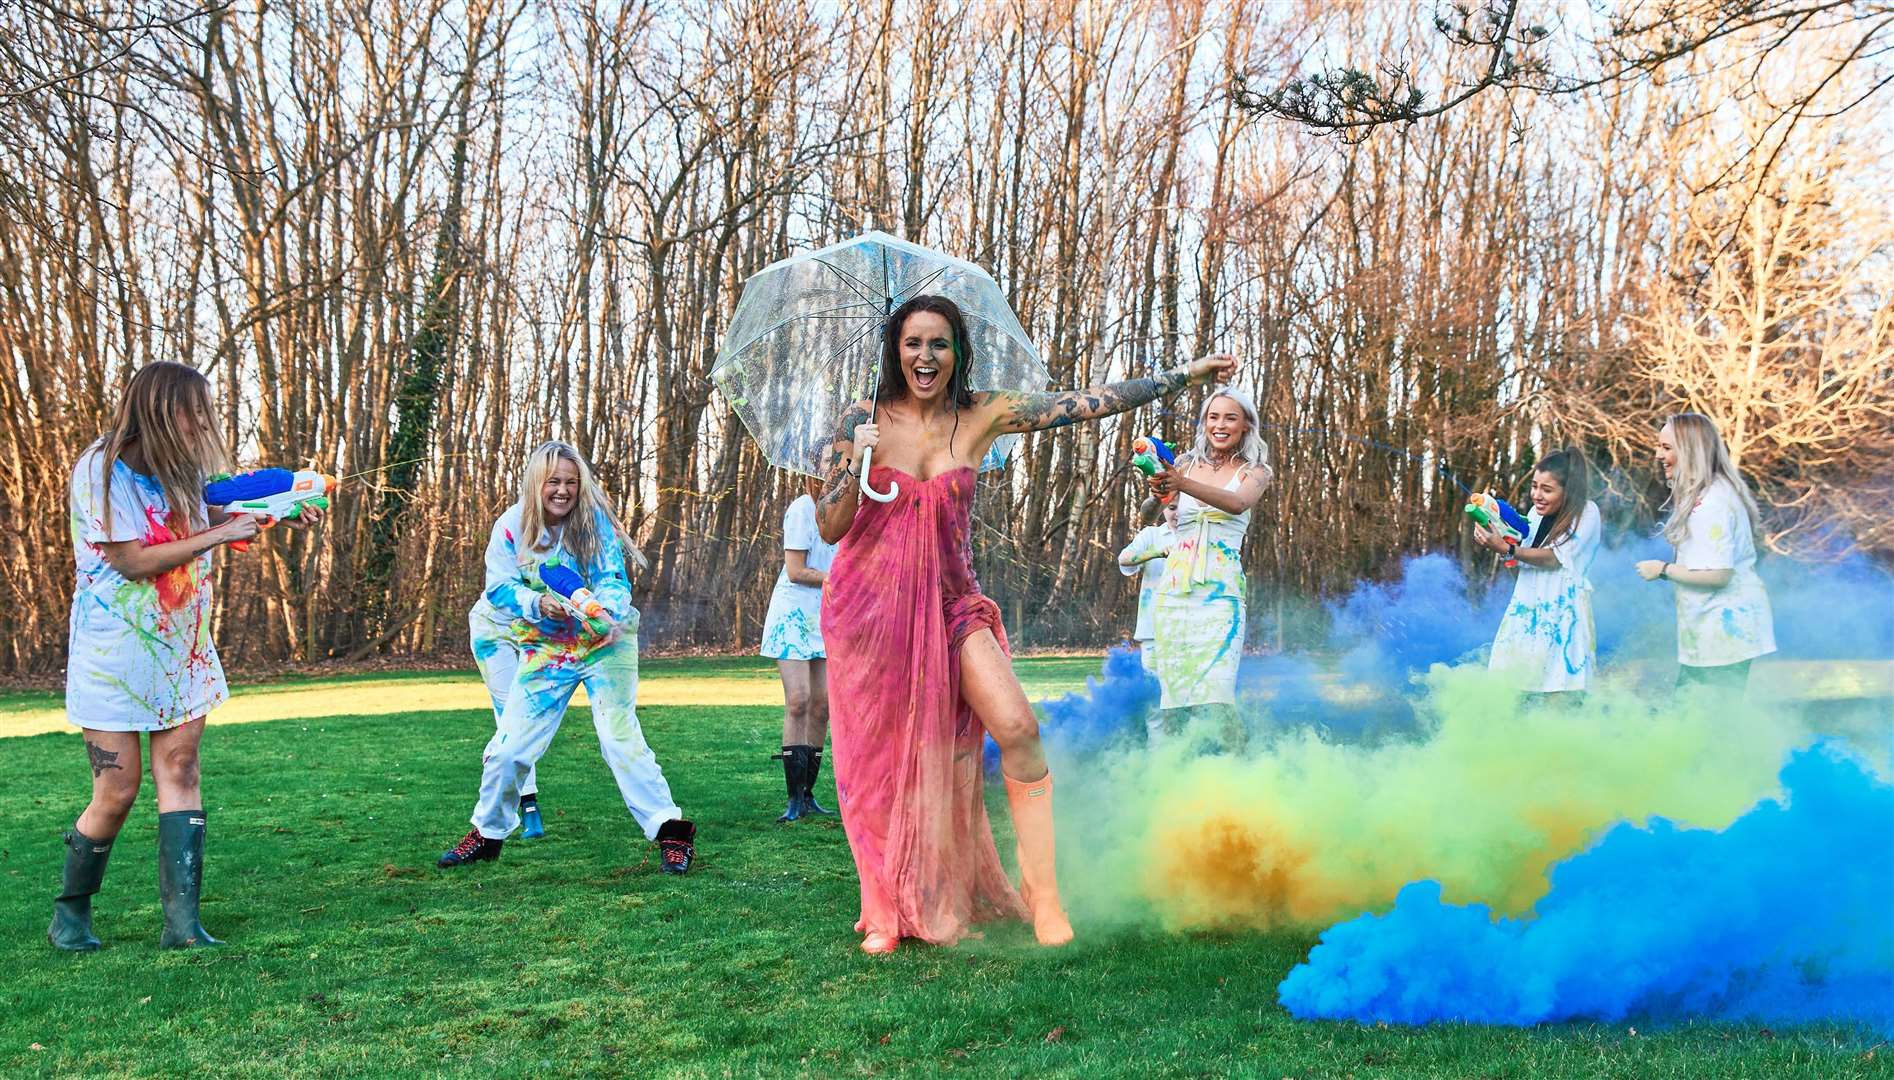 Anna O'Neill celebrated her divorce with a paint fight with her friends. Picture: Ian Lim, www.milianeyes.com